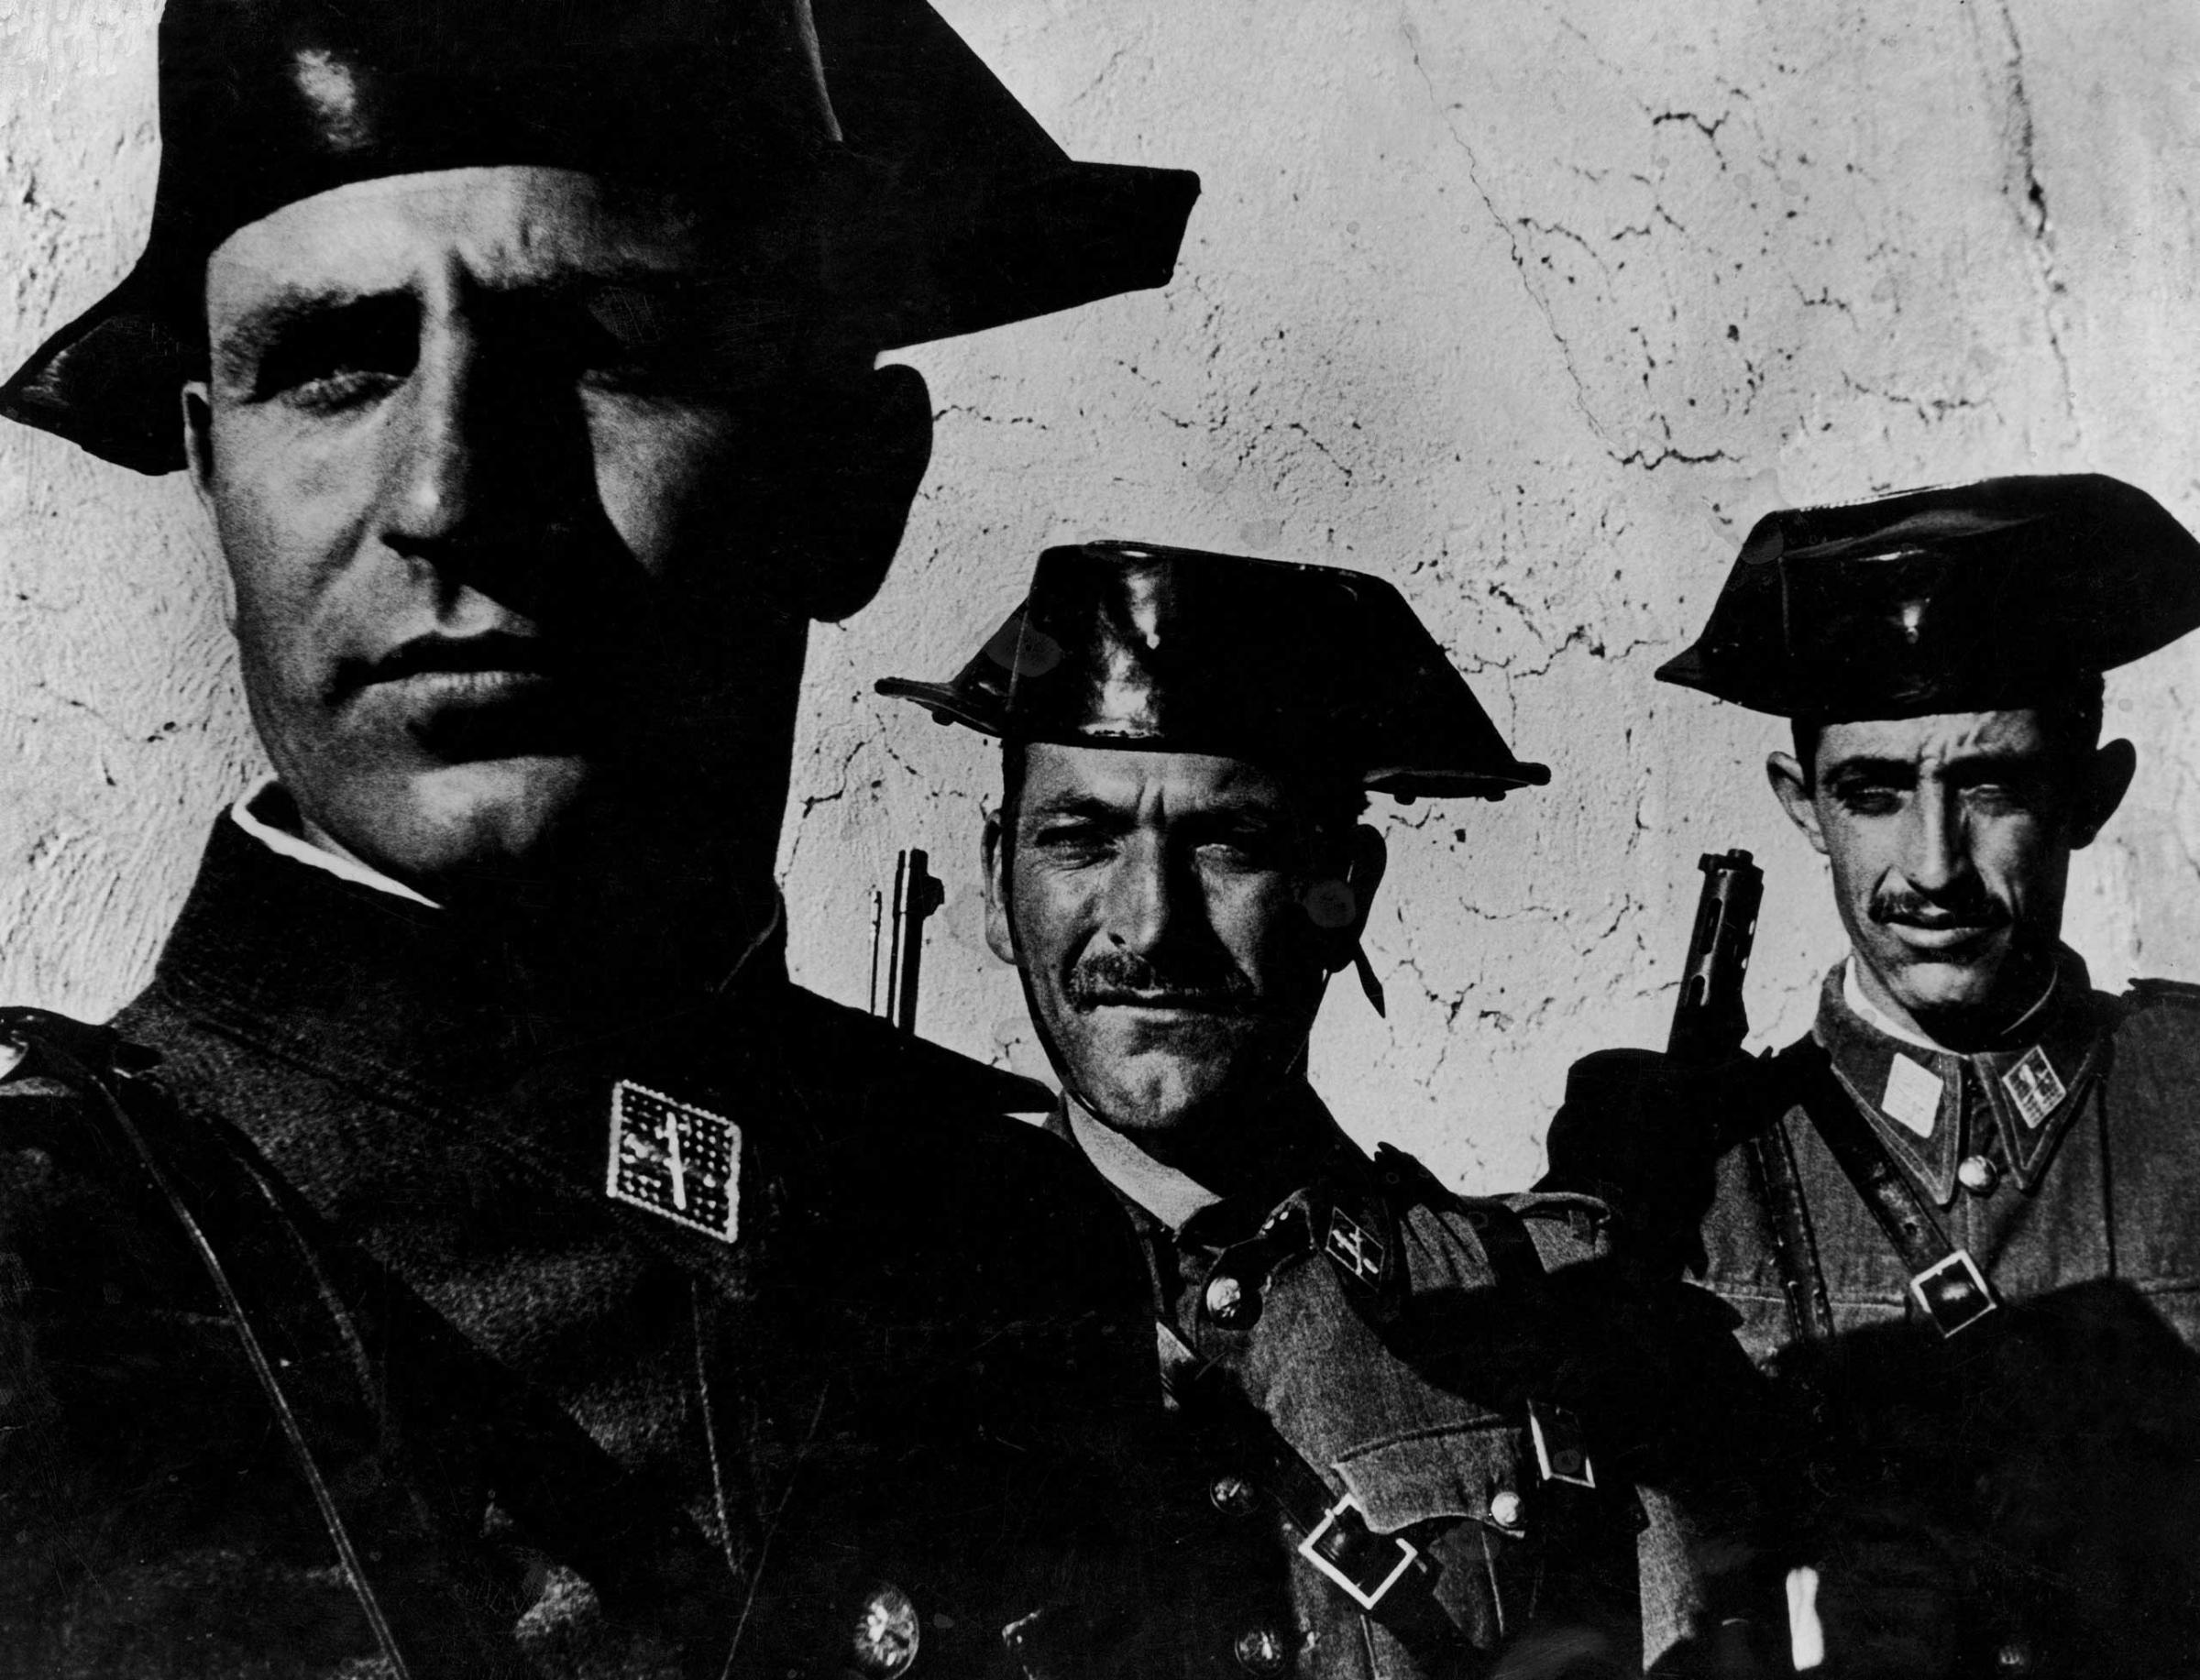 In the single most famous image from W. Eugene Smith's magisterial photo essay, "Spanish Village," the faces of three members of dictator Francisco Franco's feared Guardia Civil evince the arrogance often assumed by small men granted great power over others. Originally published in the April 9, 1951, issue of LIFE.